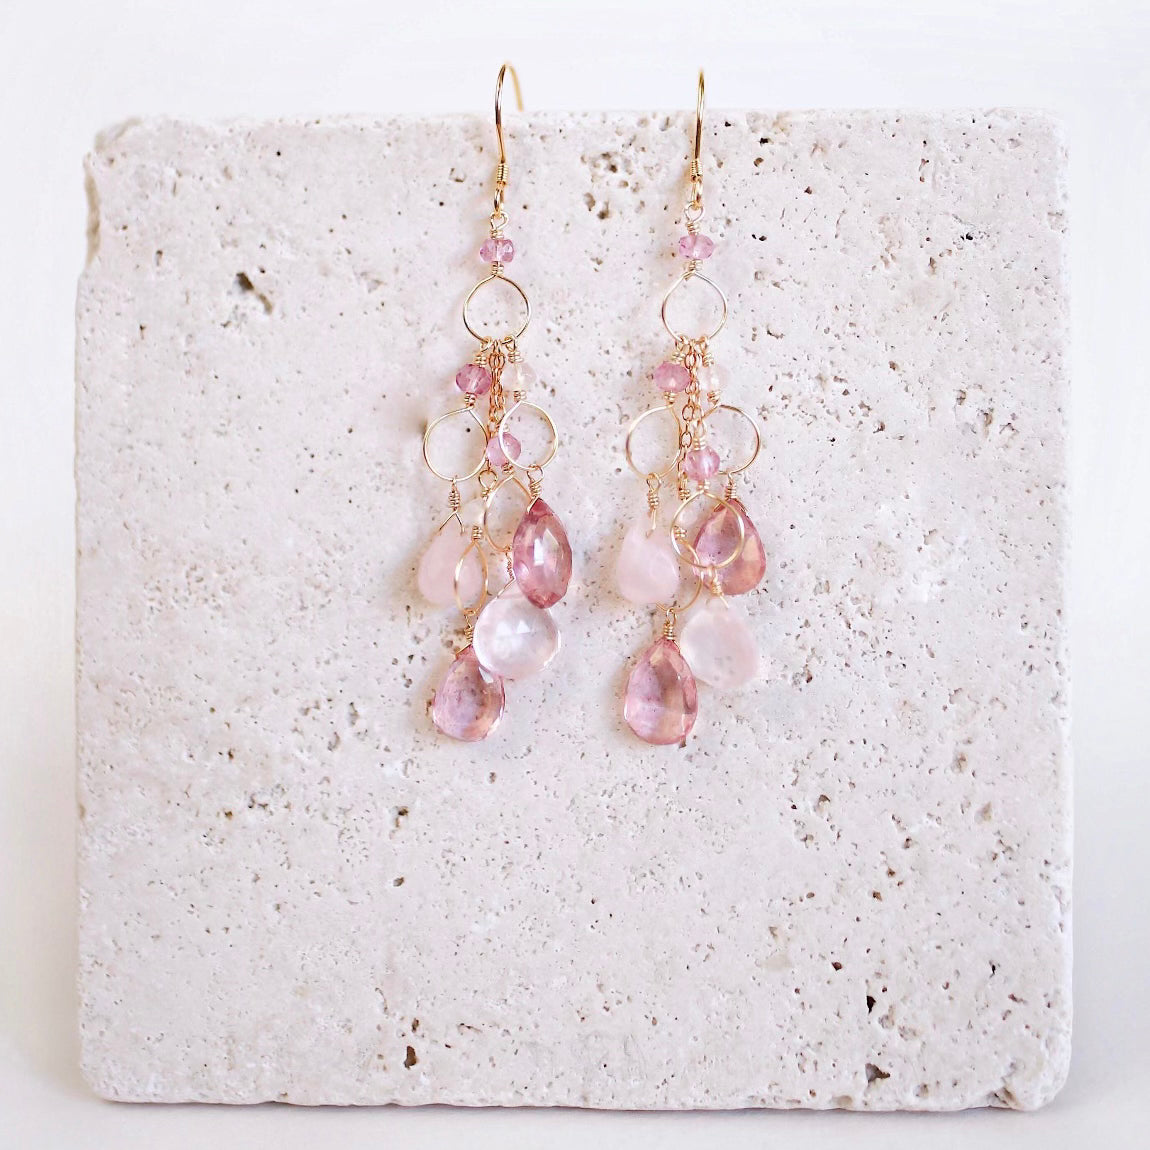 Waterfall Chandelier Earrings with Rose quartz and pink tourmaline gemstones